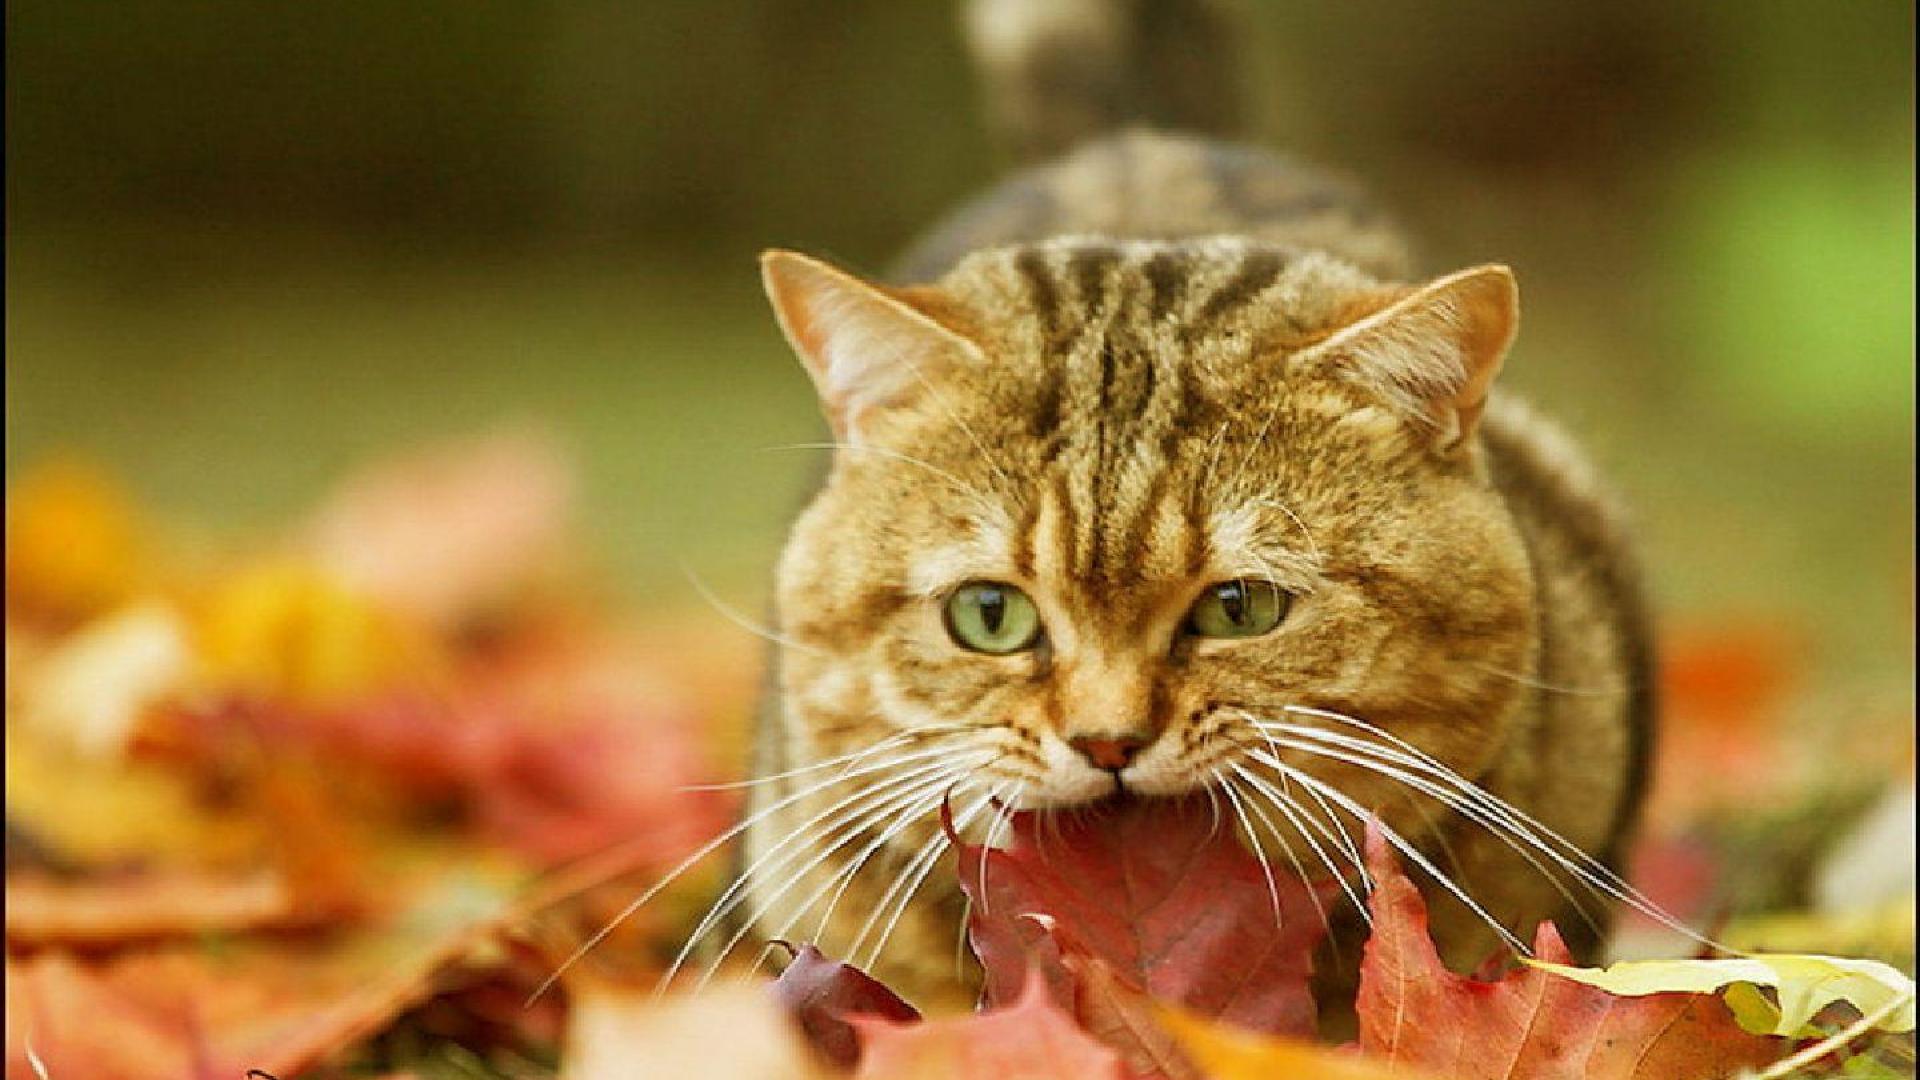 Cat in the Autumn Leaves